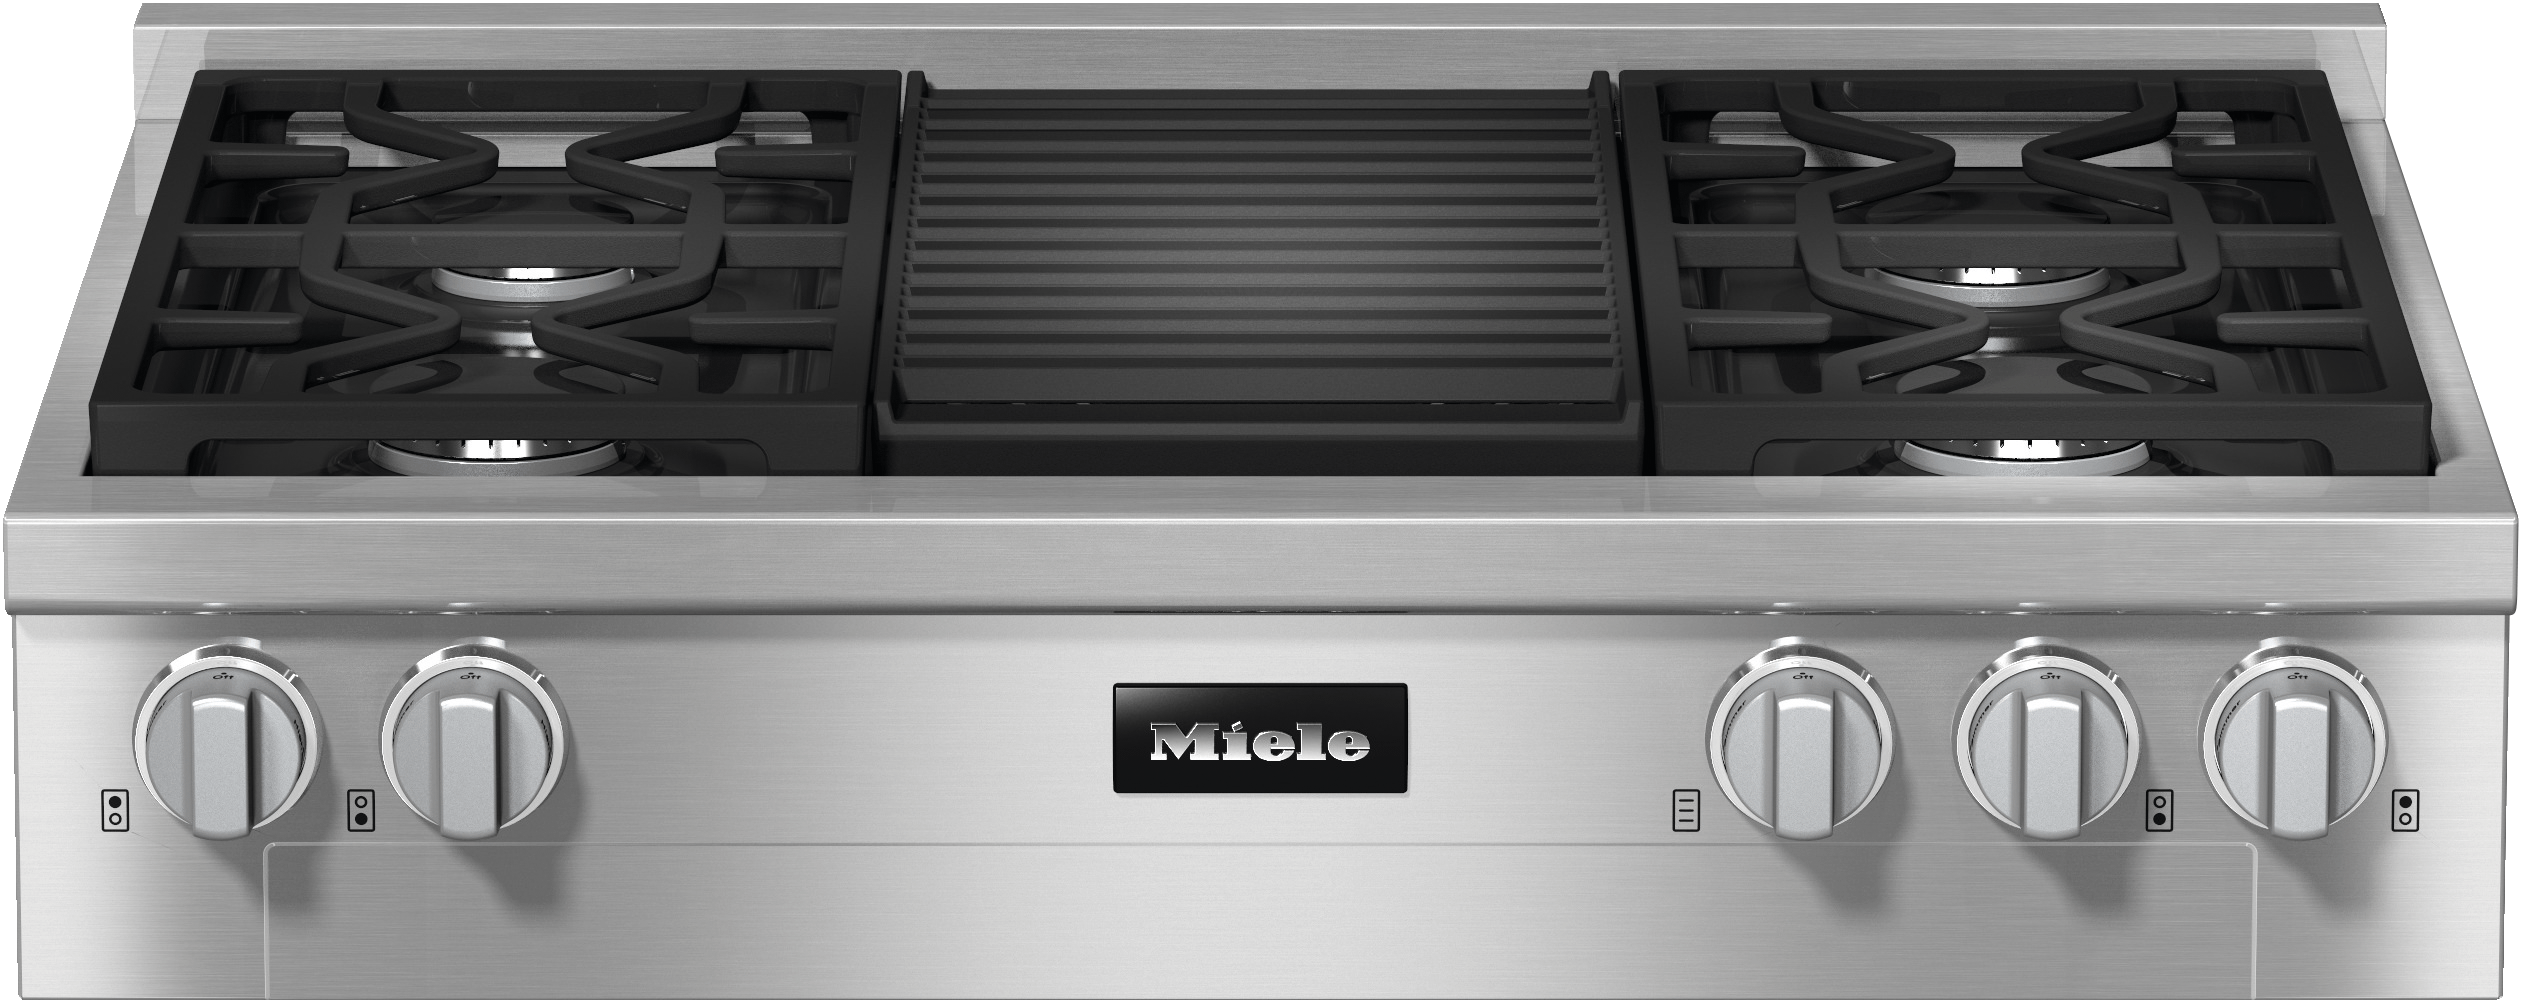 Miele KMR11353GGREDSTCLST Kmr 1135-3 G Gr Edst/Clst - Rangetop With Burners And Grill For Versatility And Performance